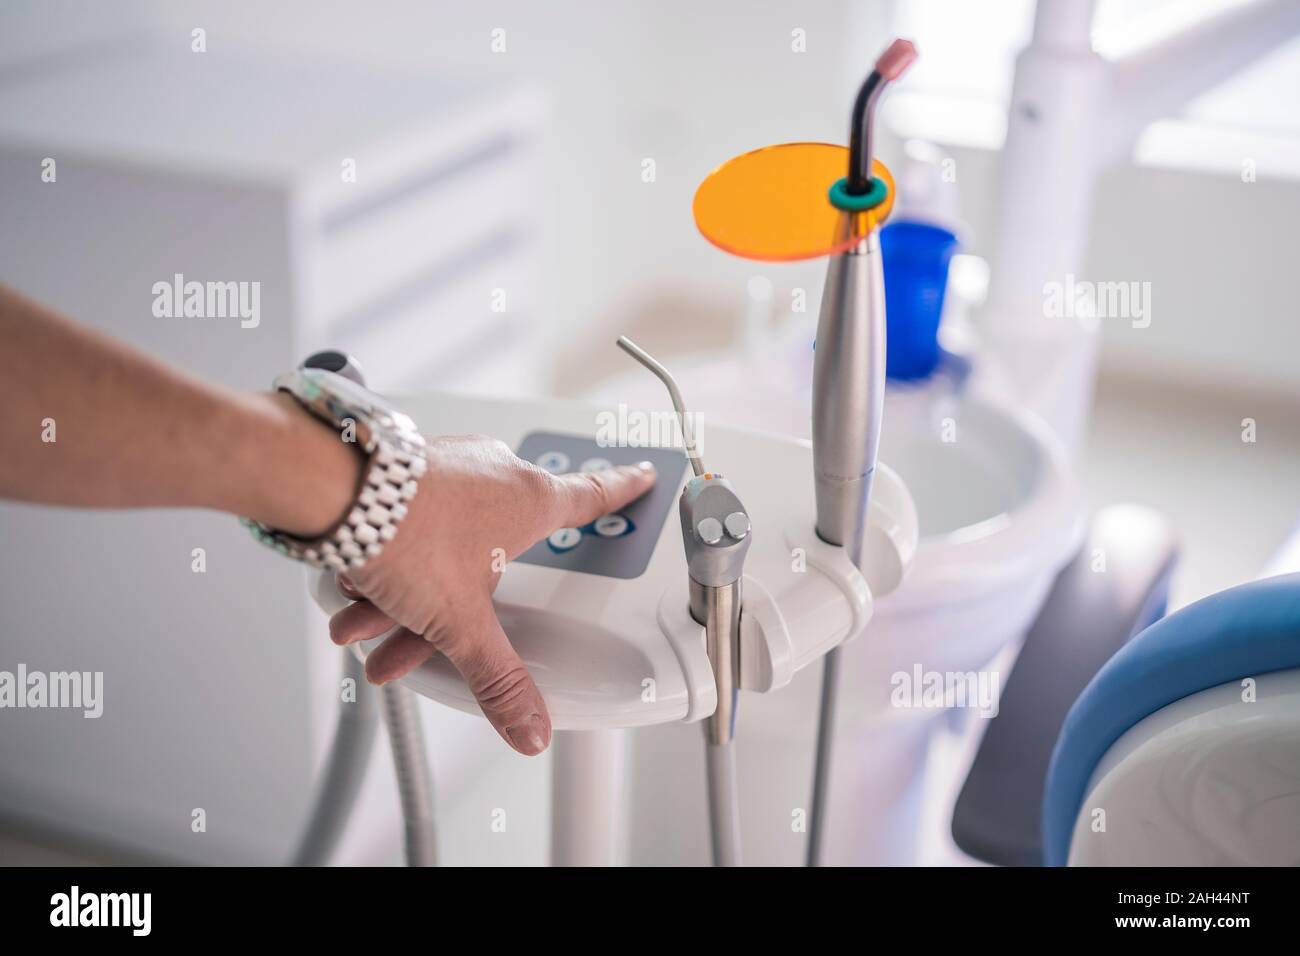 Hand pressing button of dental instrument in dental clinic Stock Photo